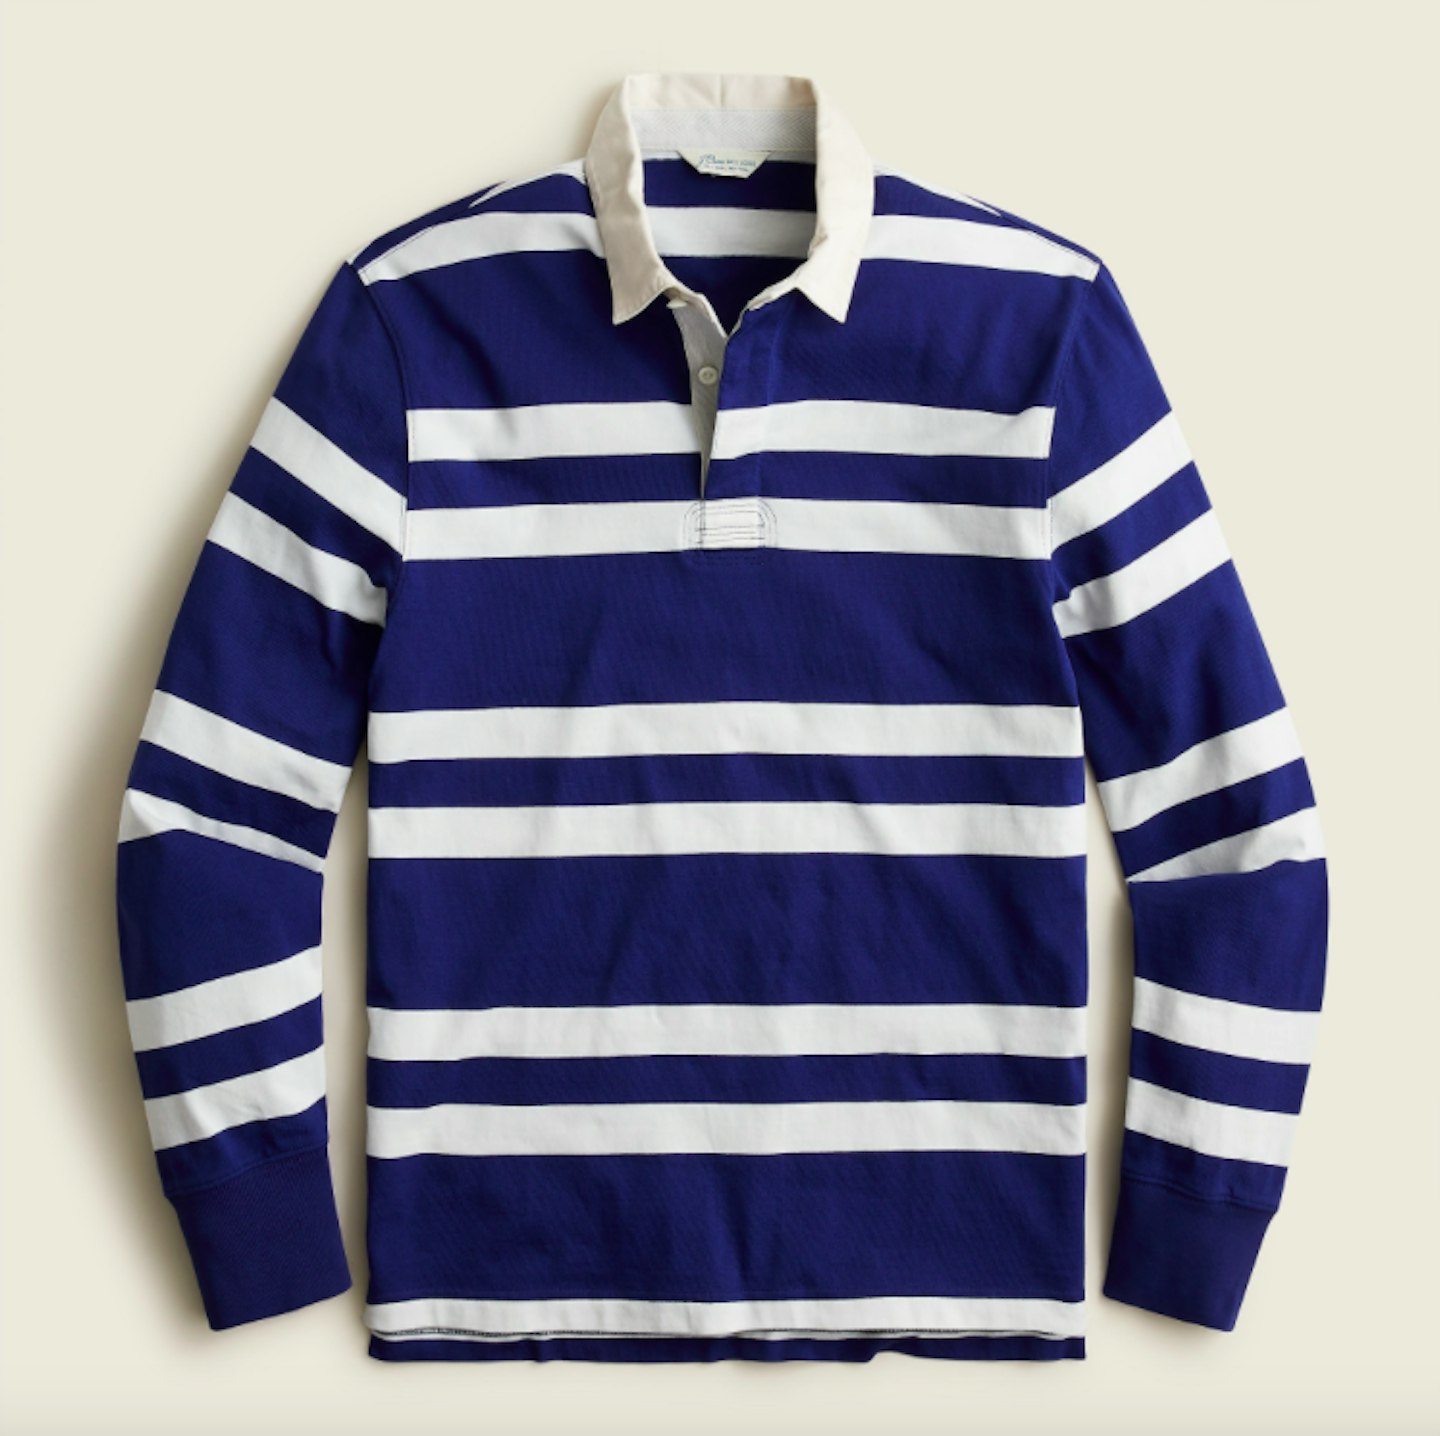 J.Crew, Rugby Shirt In Double Stripe, £95